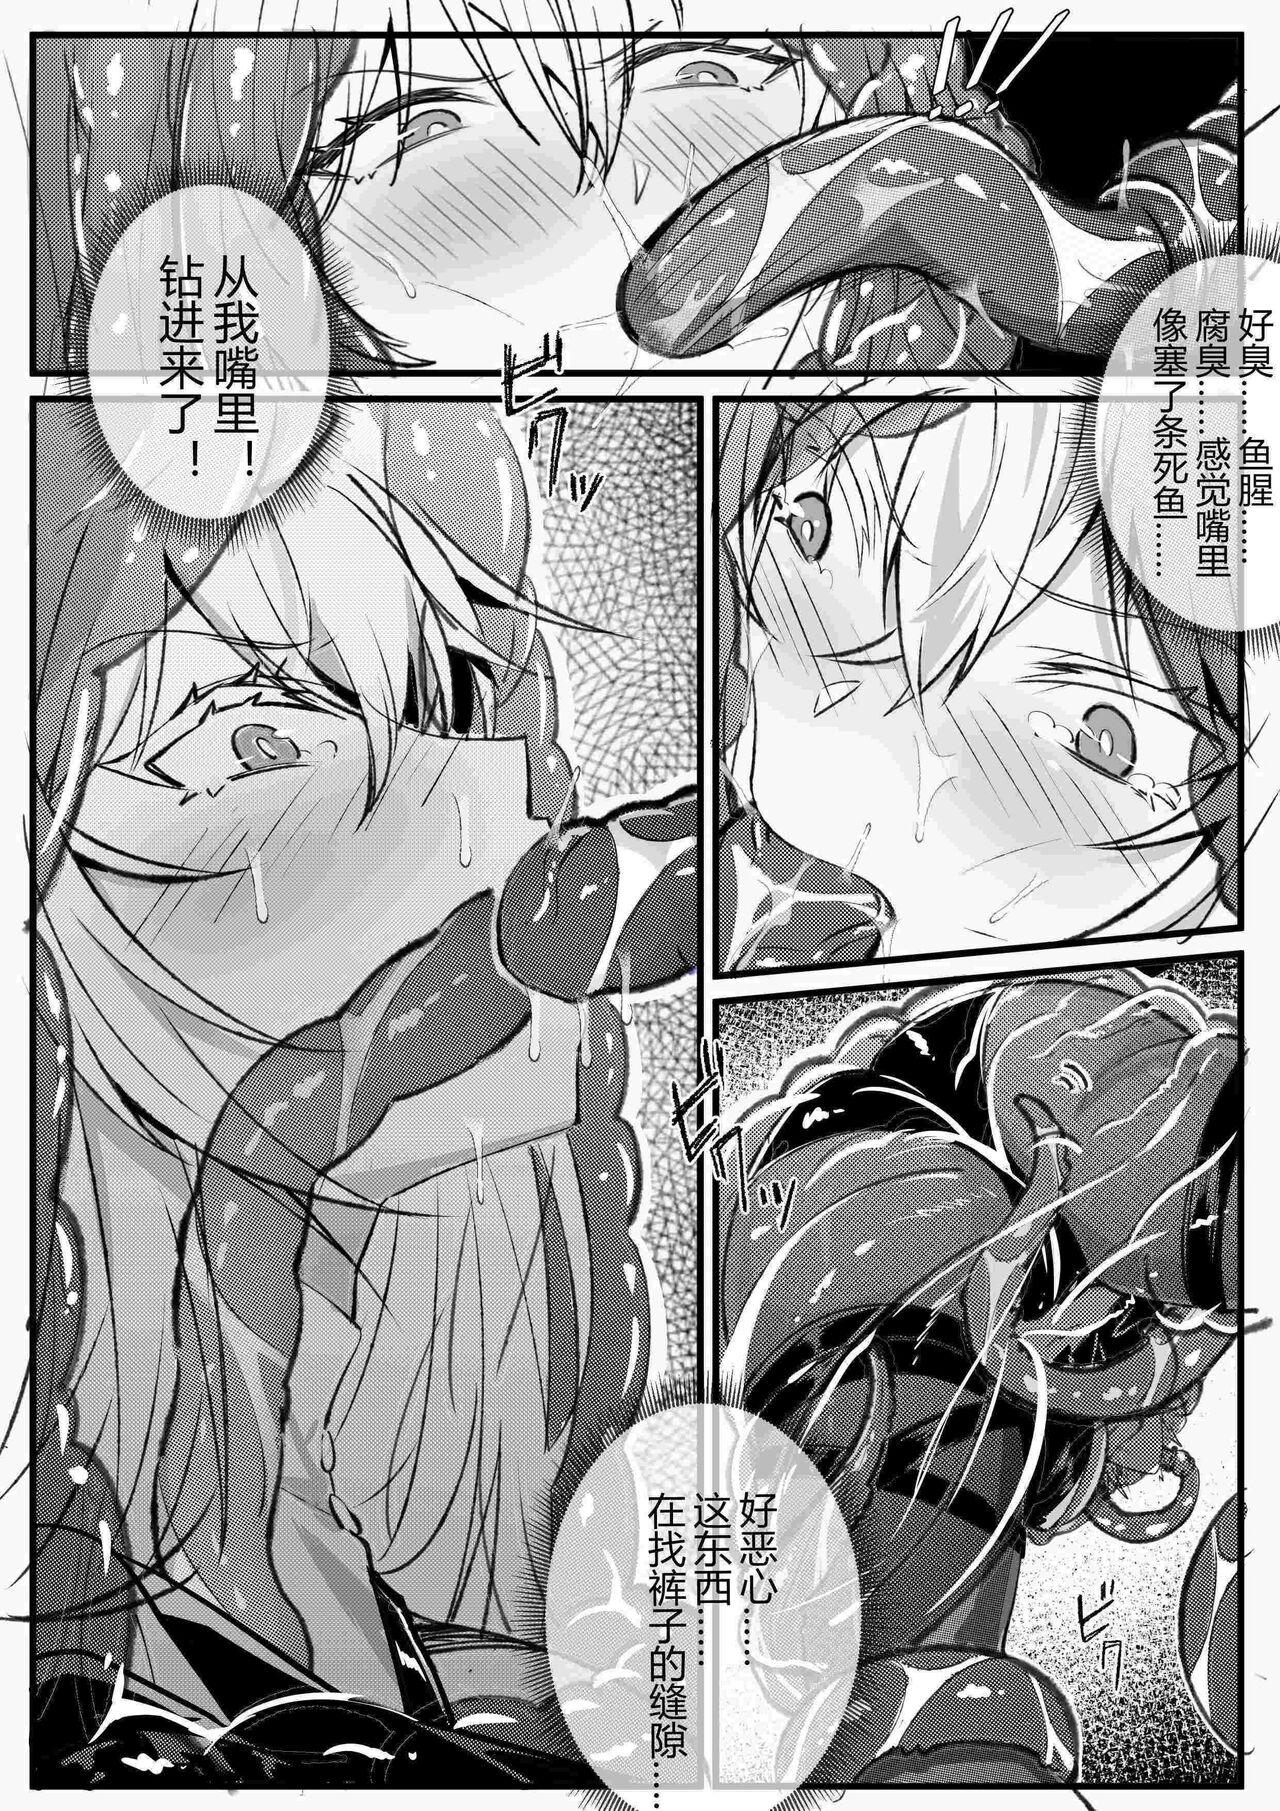 Gang 劳伦缇娜的单人吞丸寄生作战记录 - Arknights Tight Cunt - Page 7